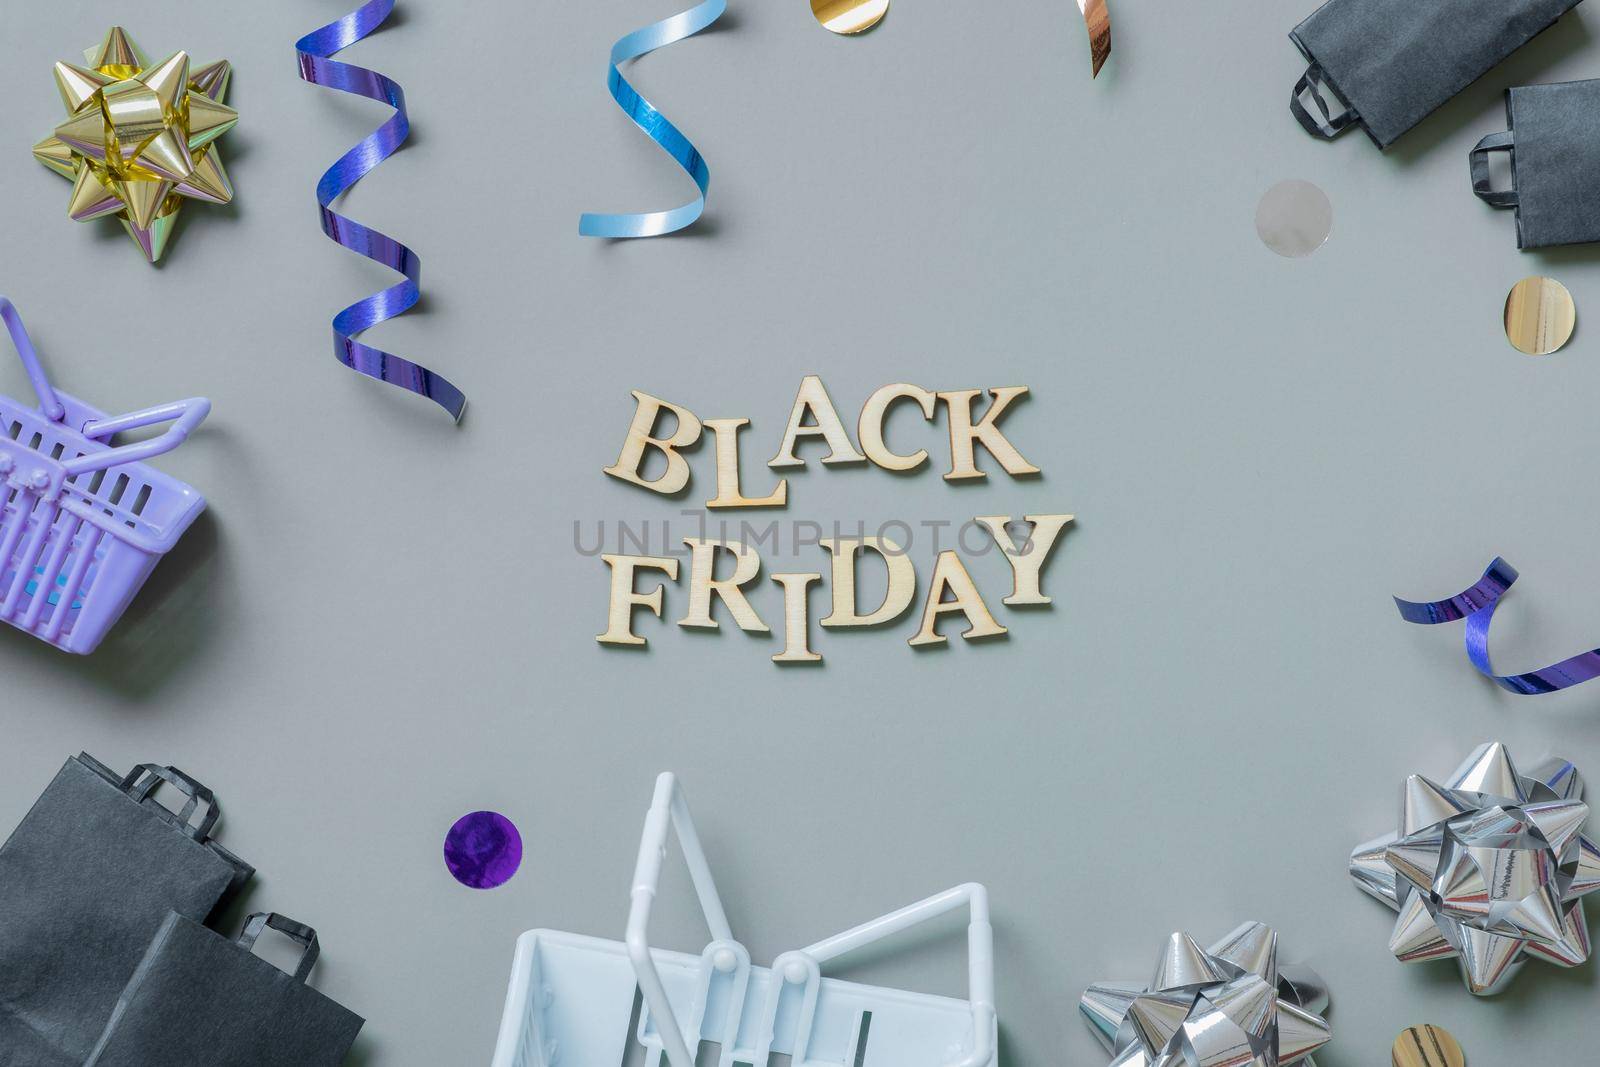 Black friday text with gifts, shopping baskets and festive tinsel flat lay.